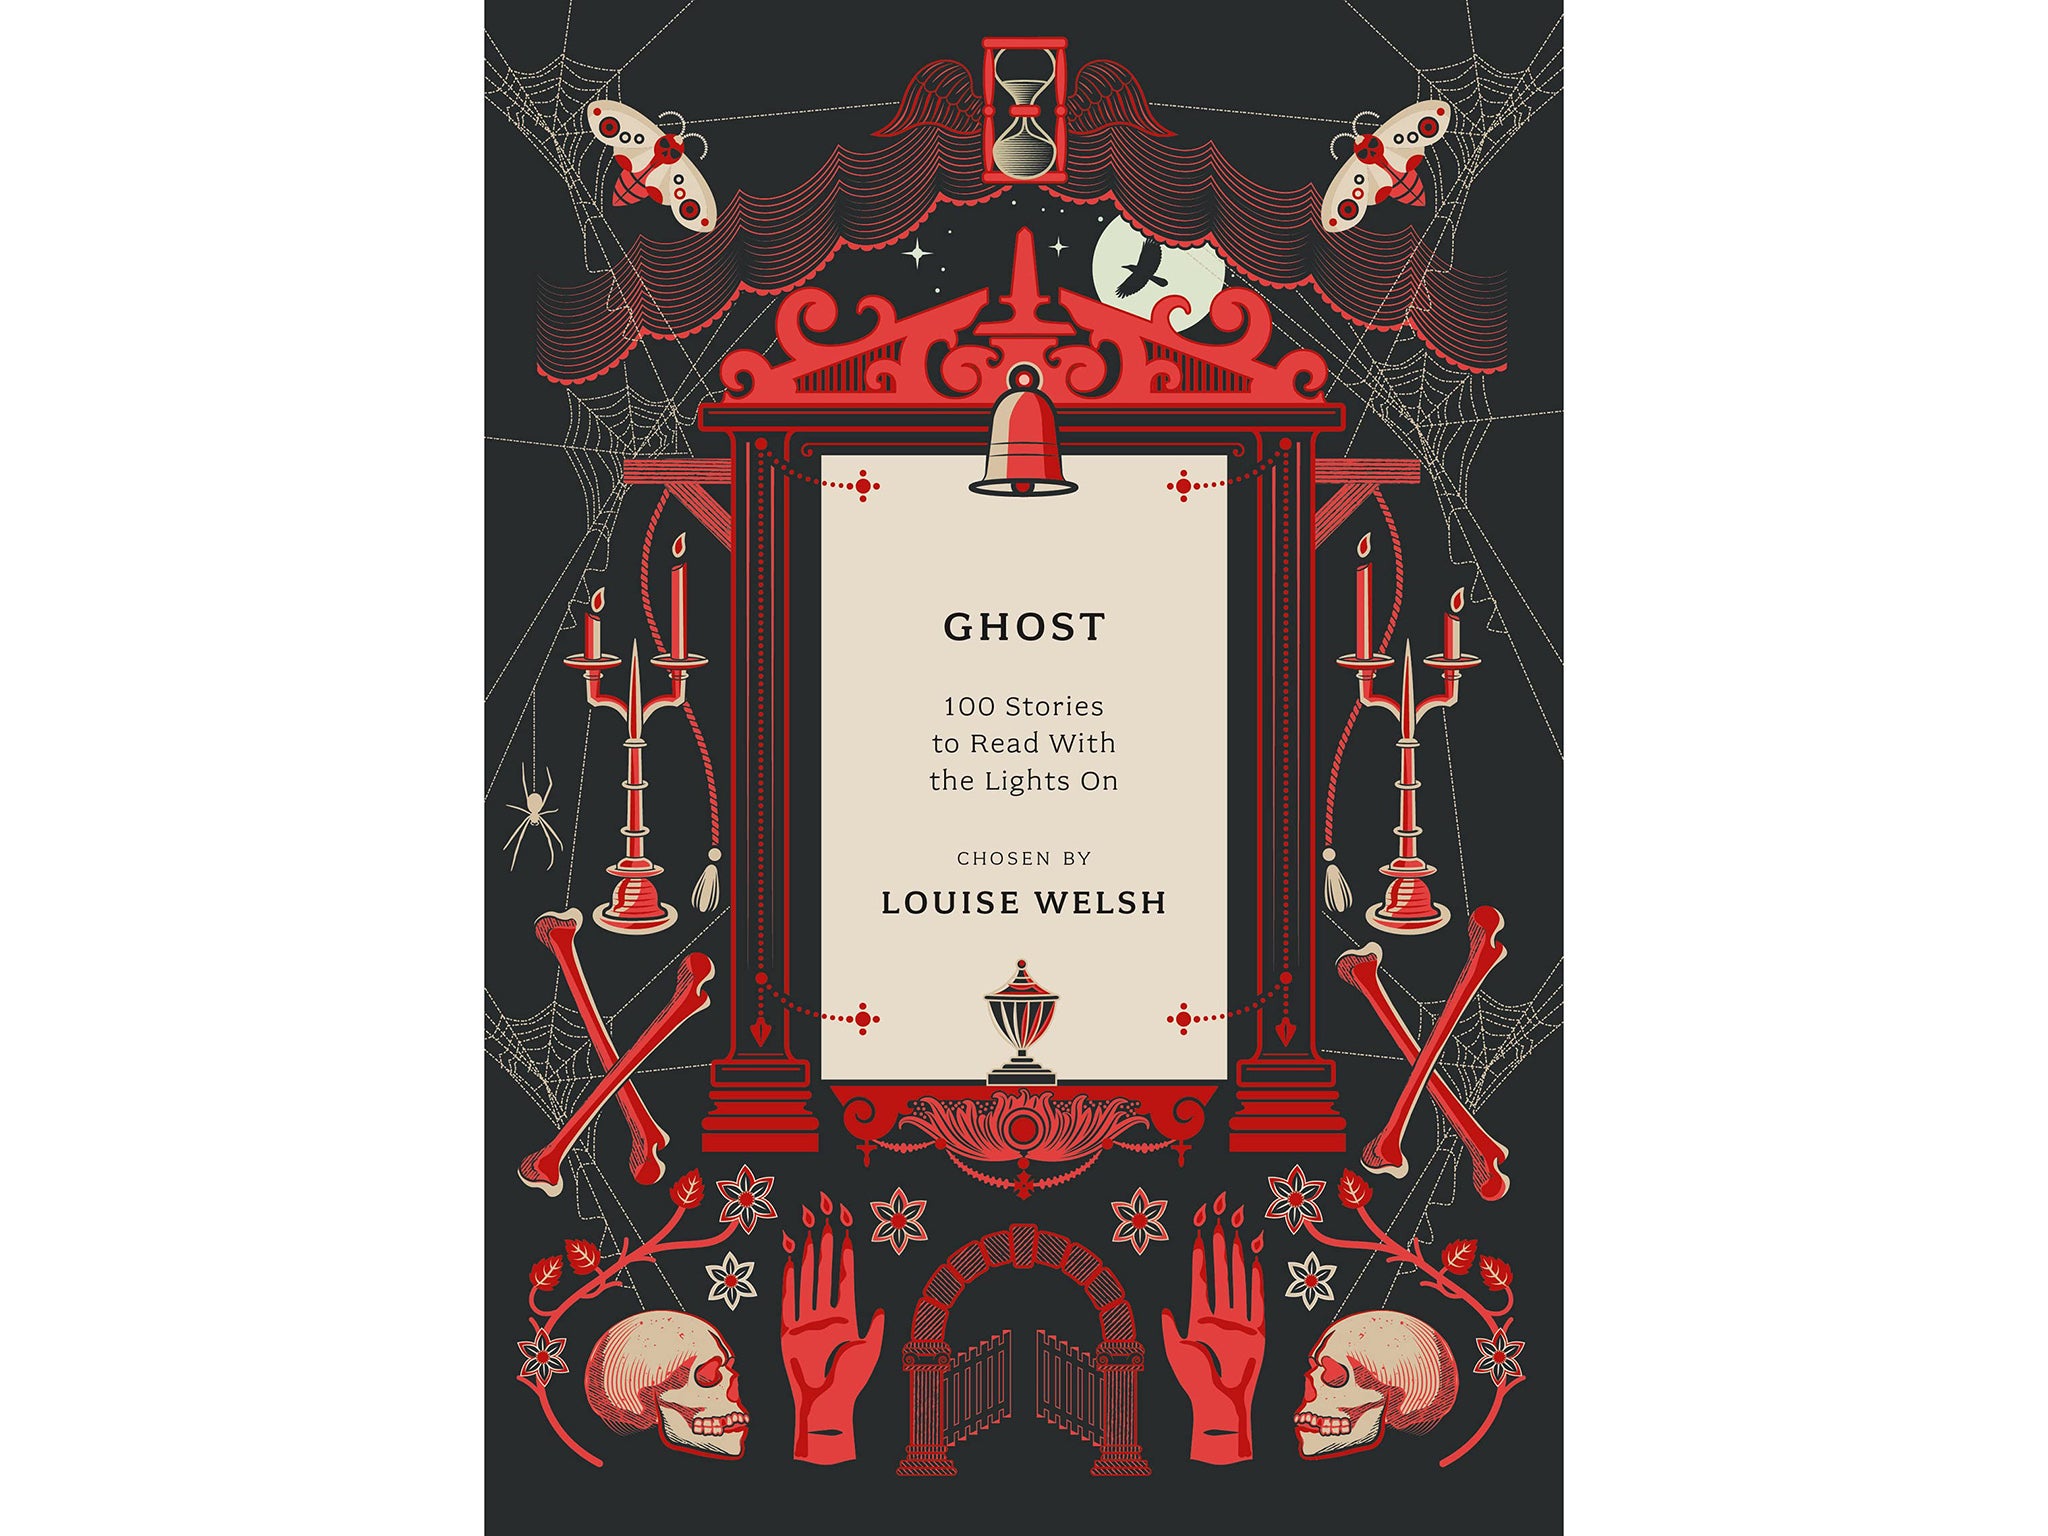 Ghost - edited by Louise Welsh